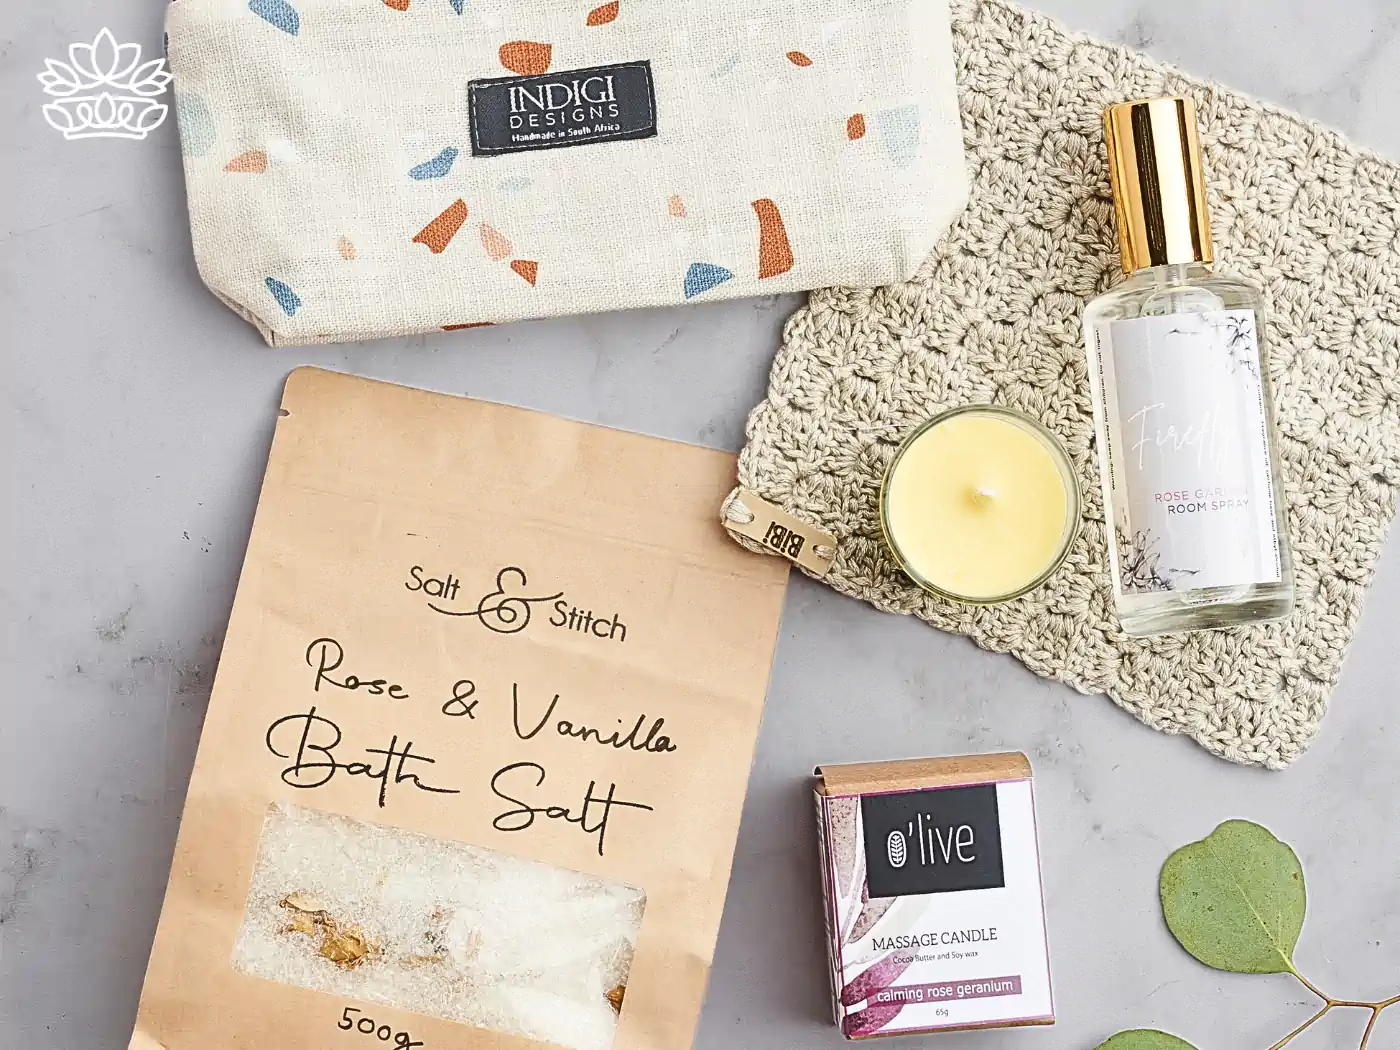 Wellness gift set including Rose & Vanilla bath salt, calming rose geranium massage candle, and a luxurious room spray, all thoughtfully presented on a knitted mat. Delivered with Heart. Fabulous Flowers and Gifts.